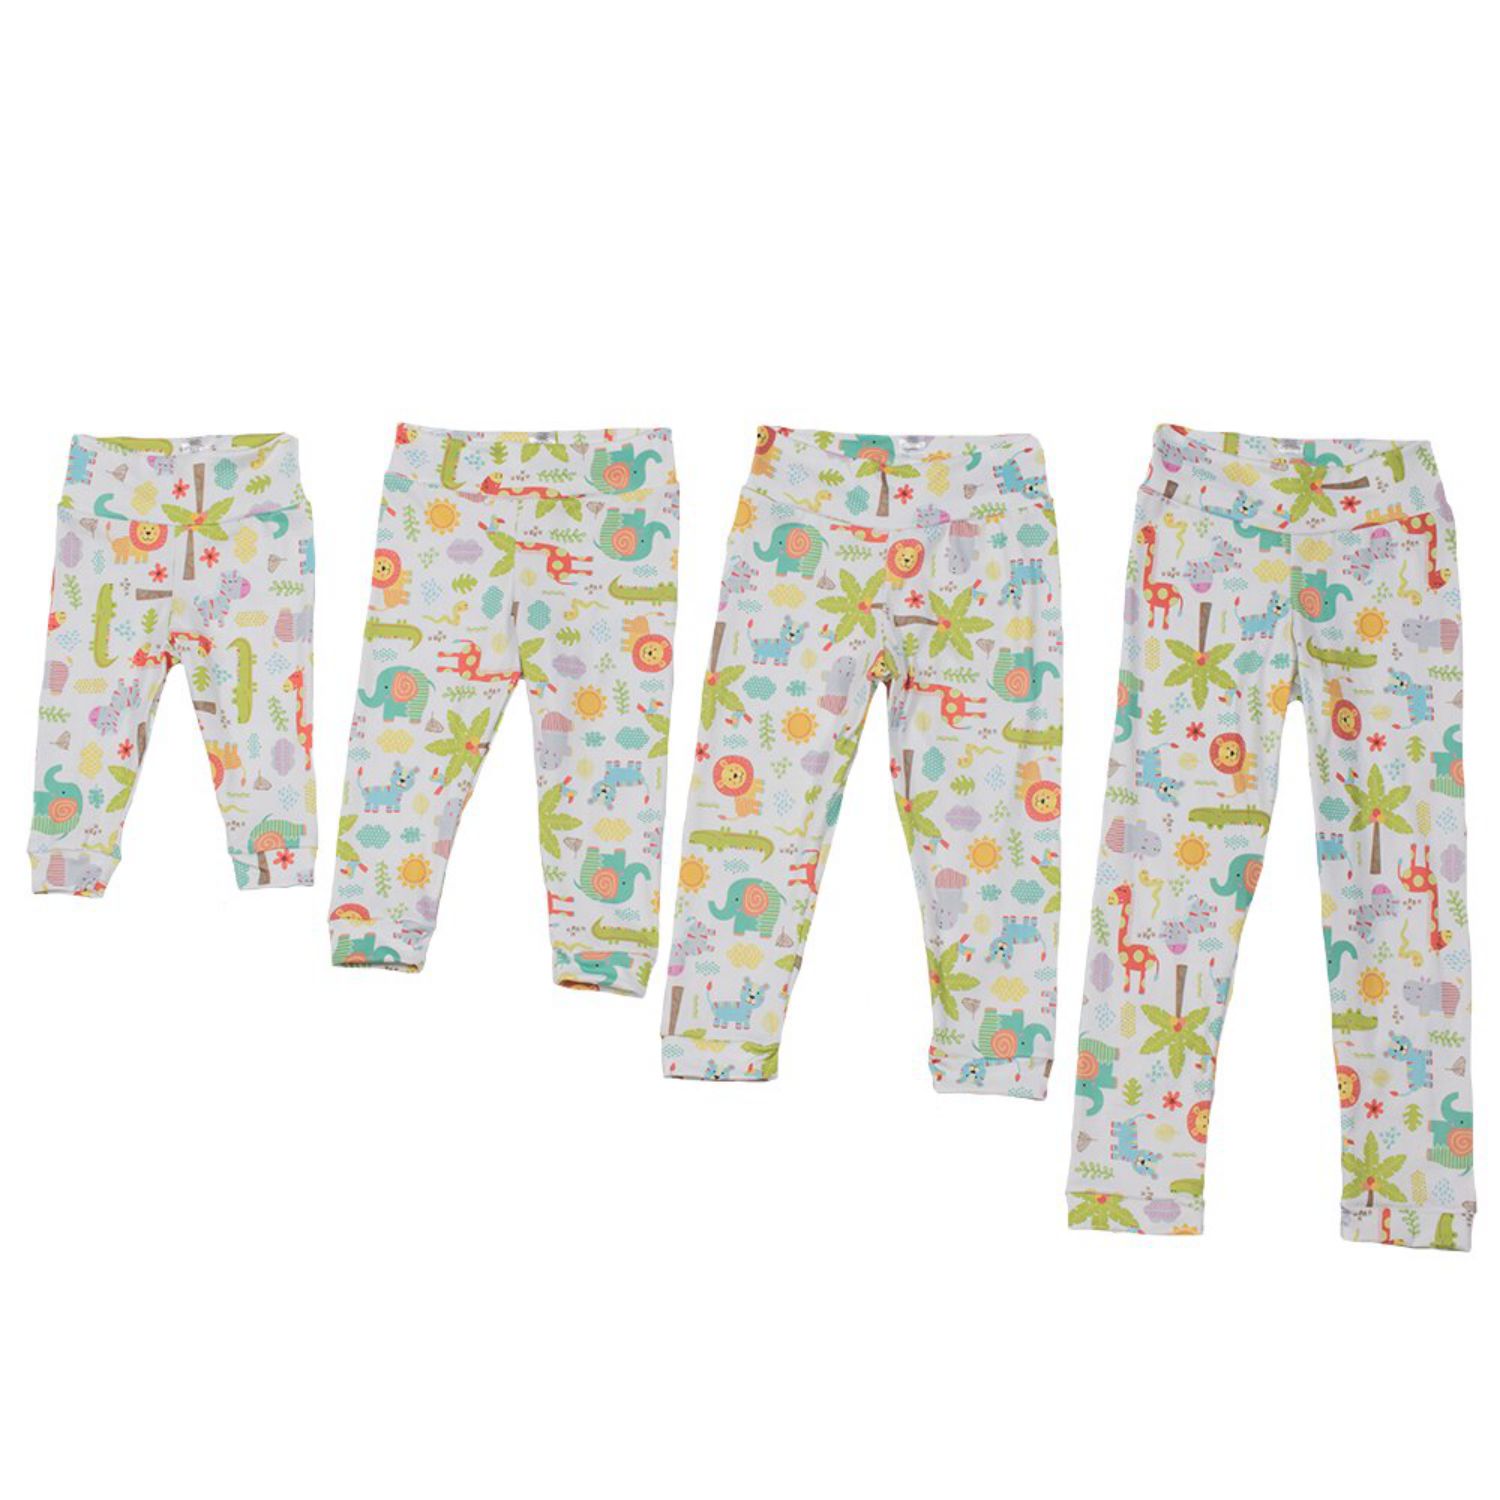 Bumblito Leggings Größe: L (92 - 104) / Muster: Wild About you